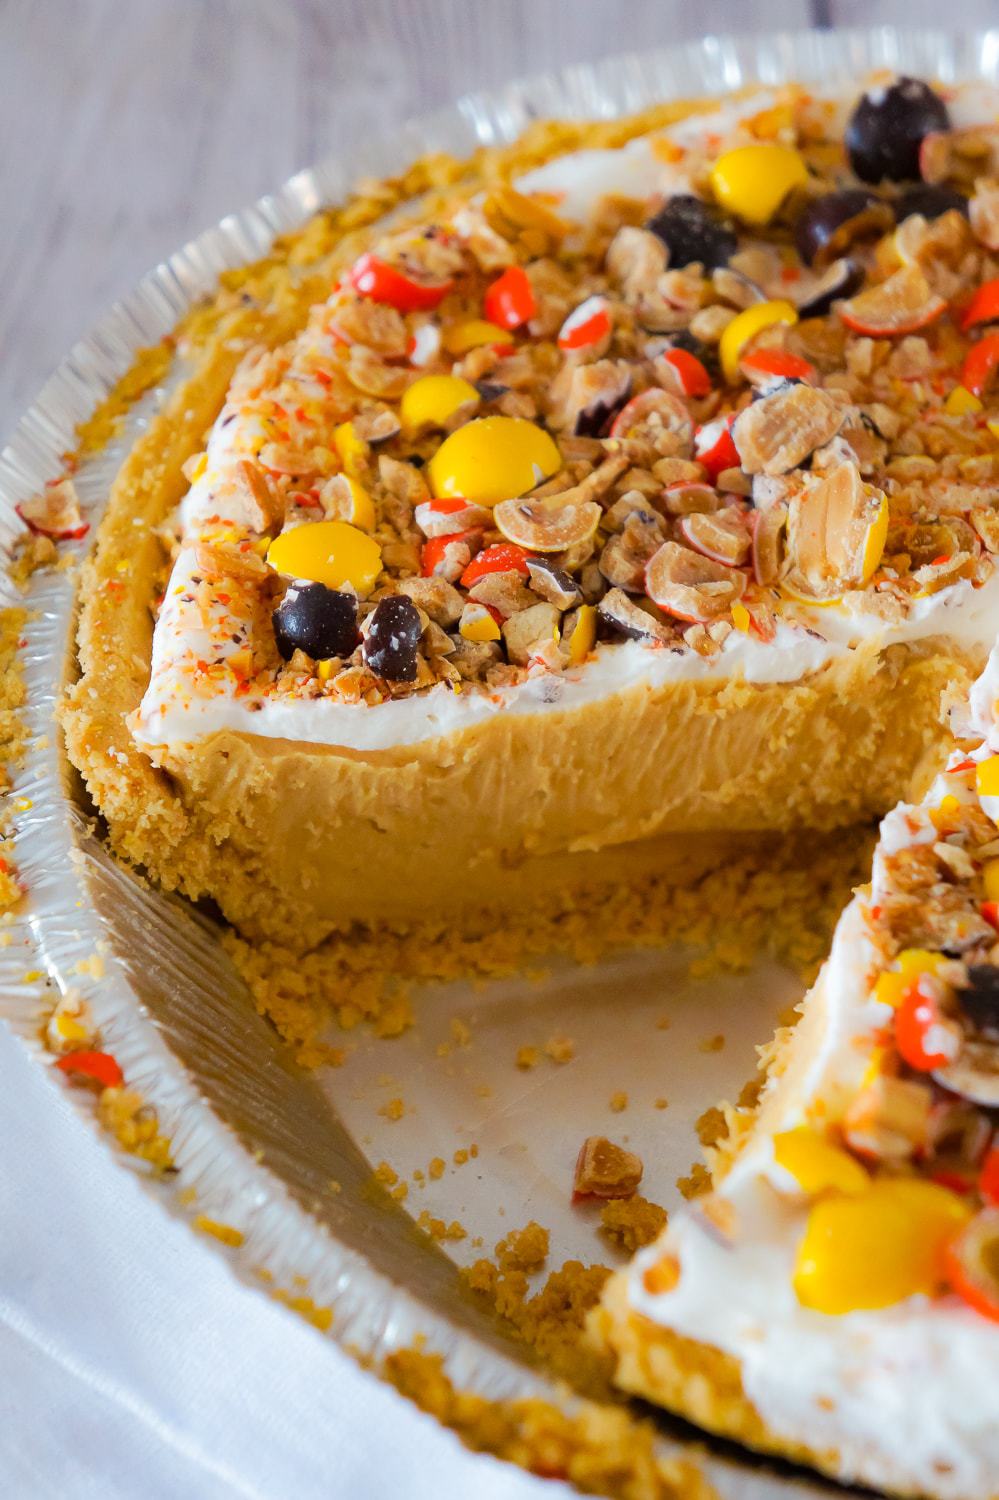 Peanut Butter Pie - This is Not Diet Food